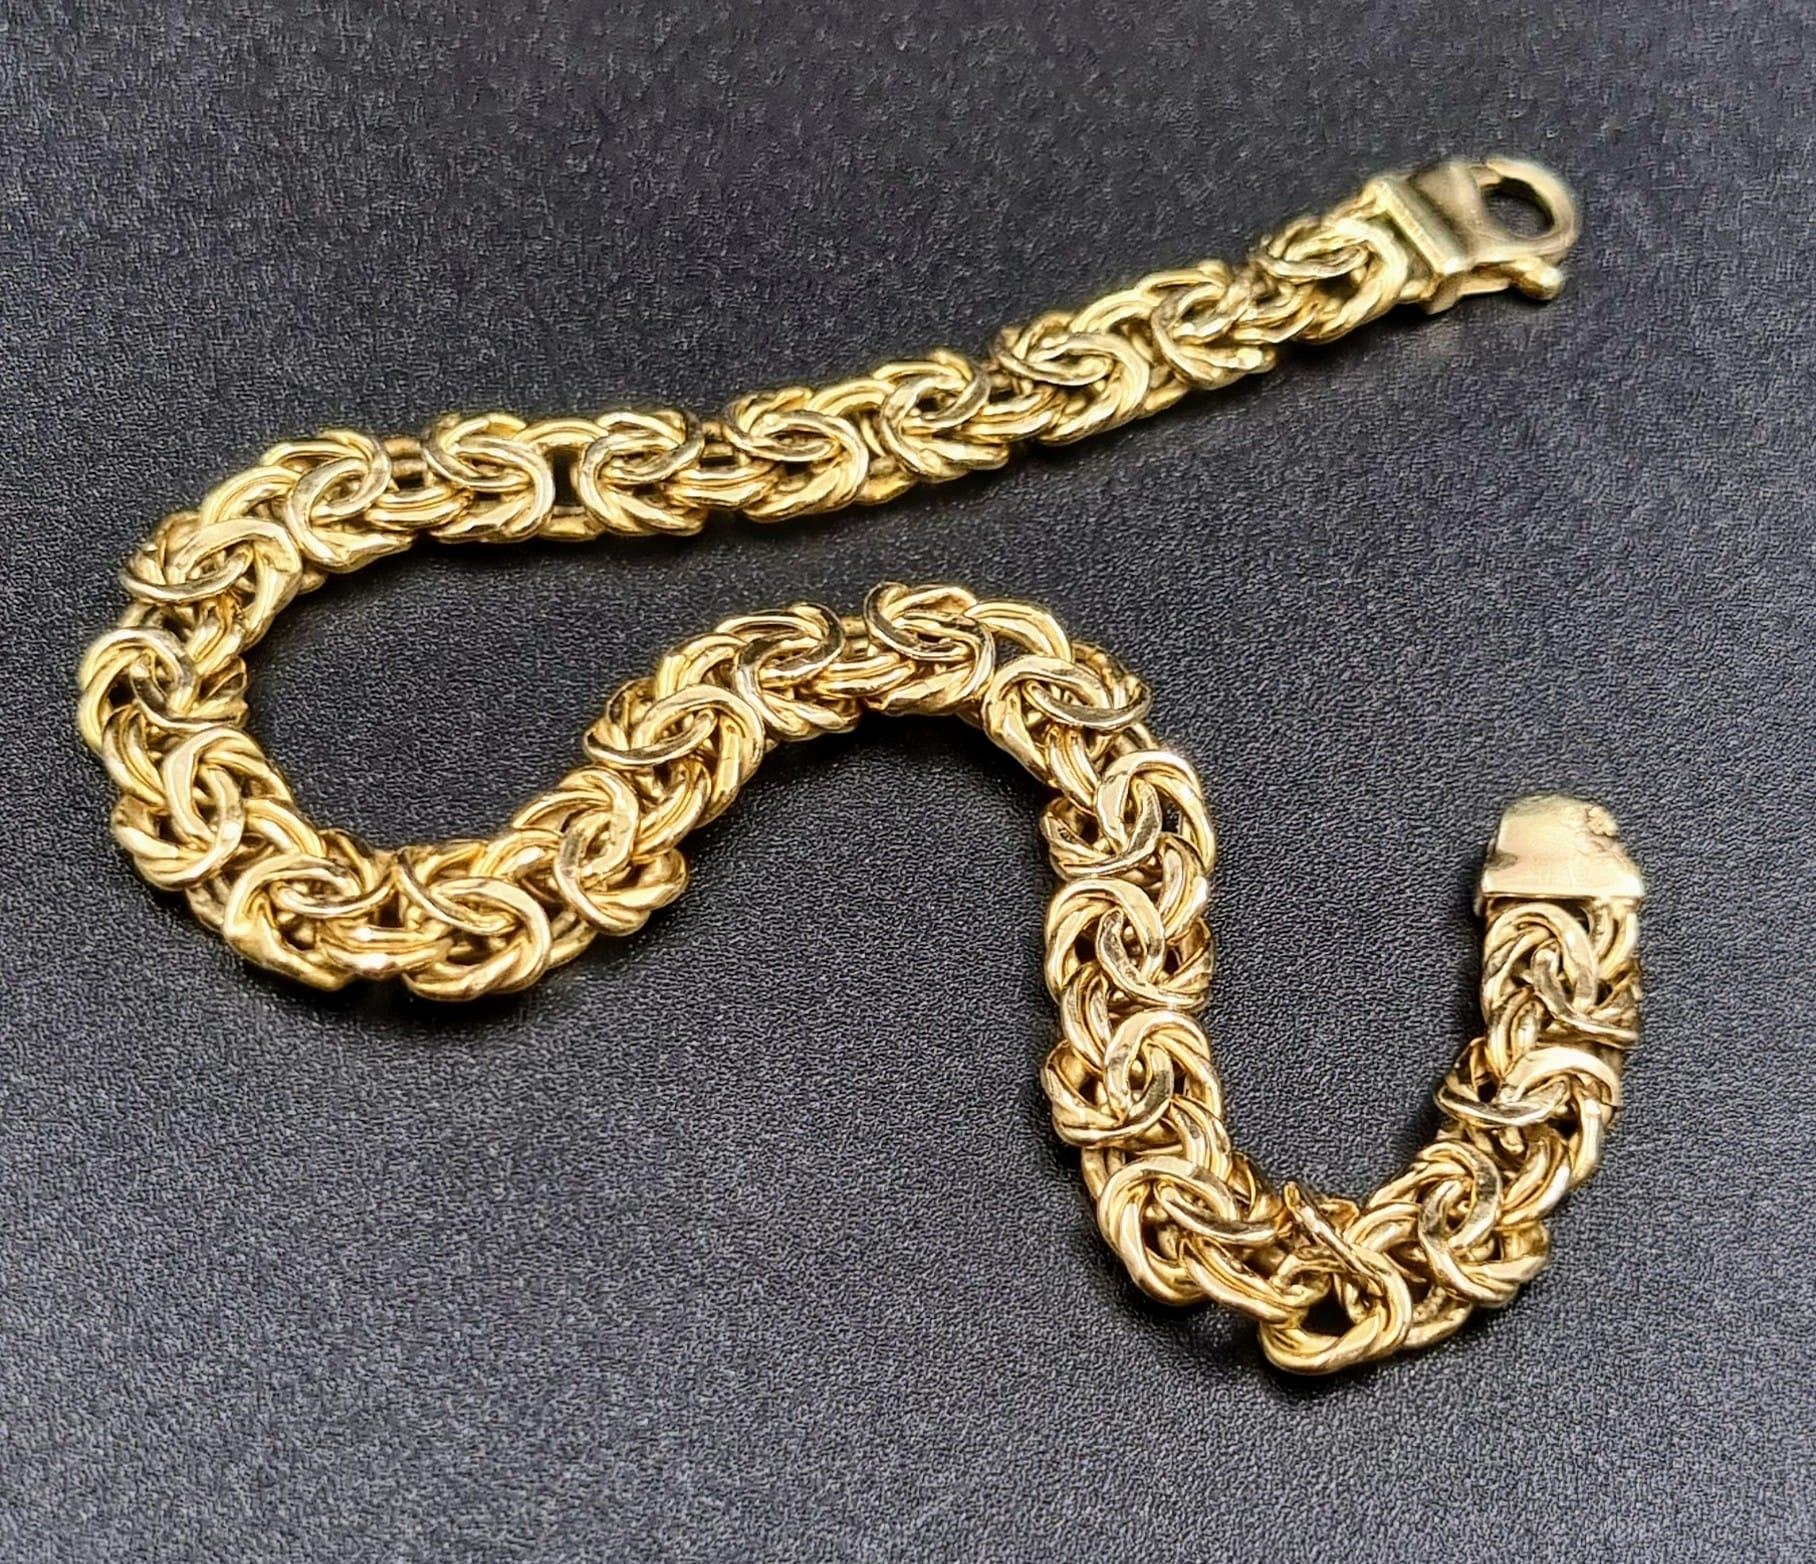 An Italian 9K Yellow Gold Entwined-Link Bracelet. 18cm. 7.12g total weight. - Image 4 of 5